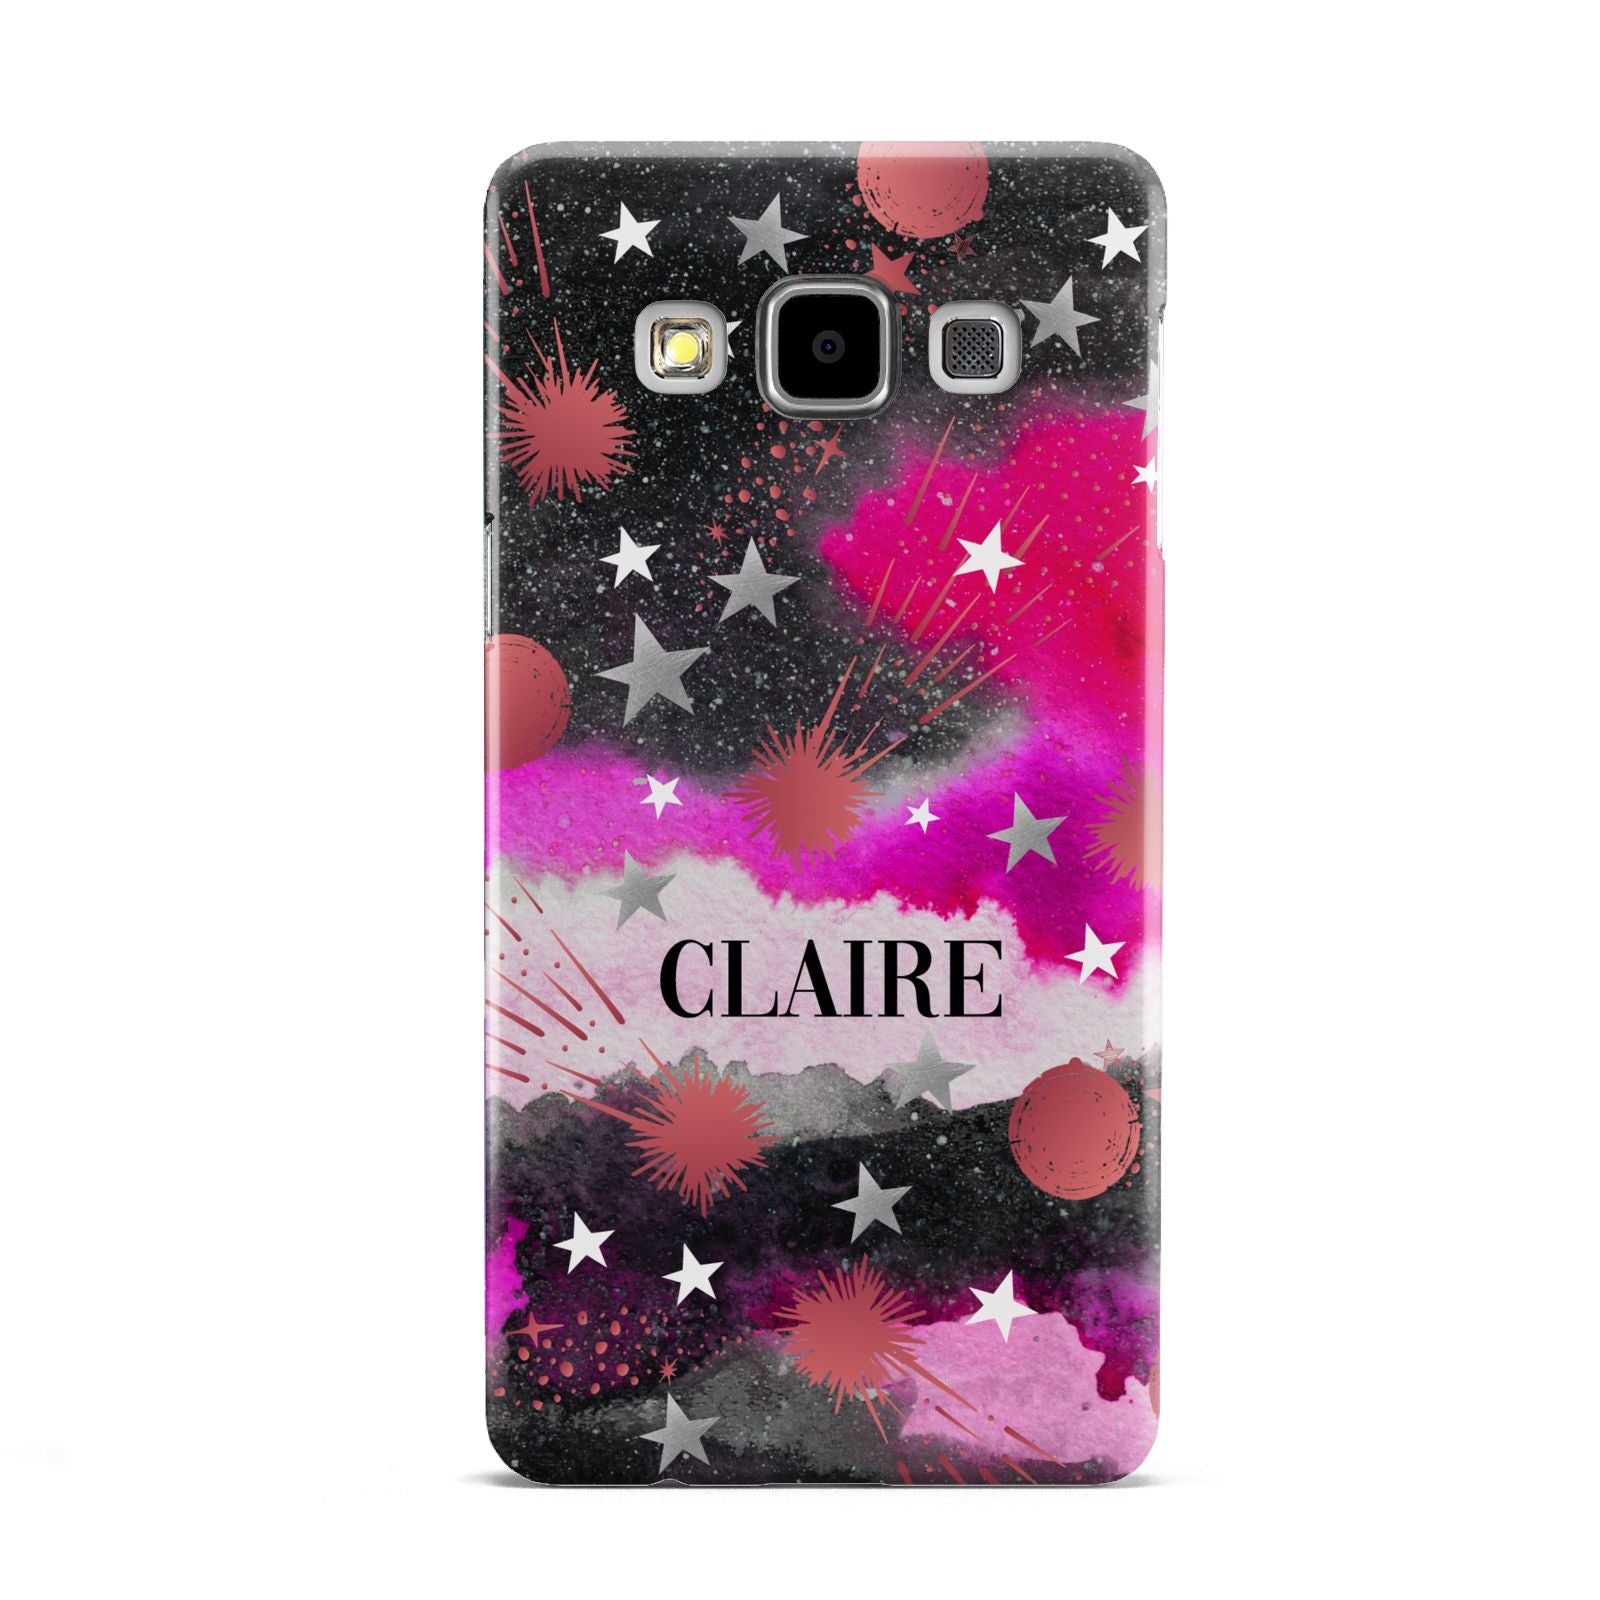 Personalised Pink Celestial Samsung Galaxy A5 Case